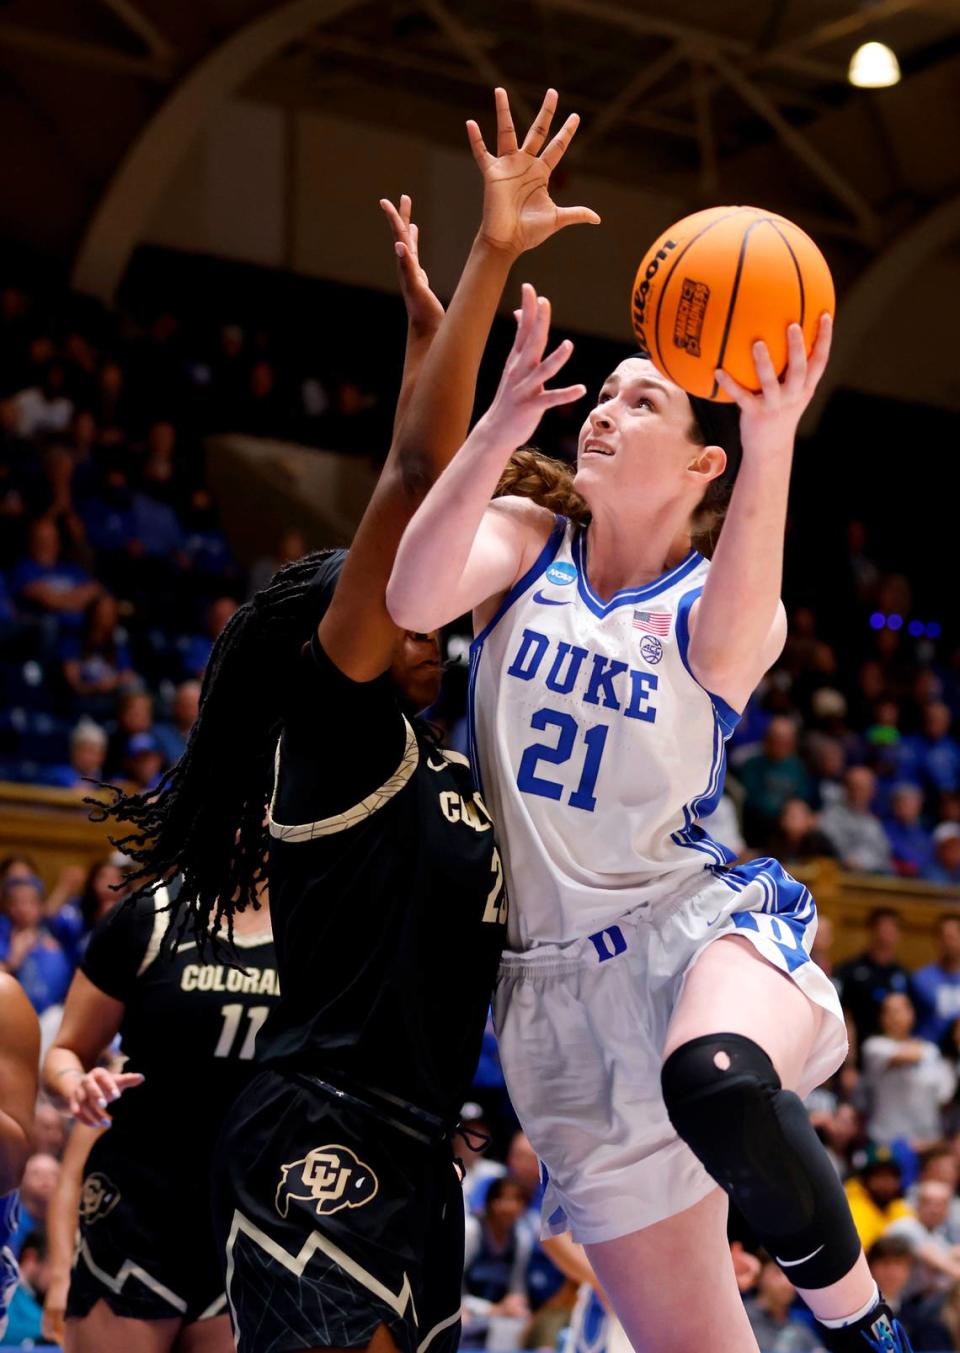 Duke’s Kennedy Brown makes a move to the basket during the second half of the Blue Devils’ 61-53 loss to Colorado in an NCAA Tournament second round game at Cameron Indoor Stadium on Monday, March 20, 2023, in Durham, N.C.